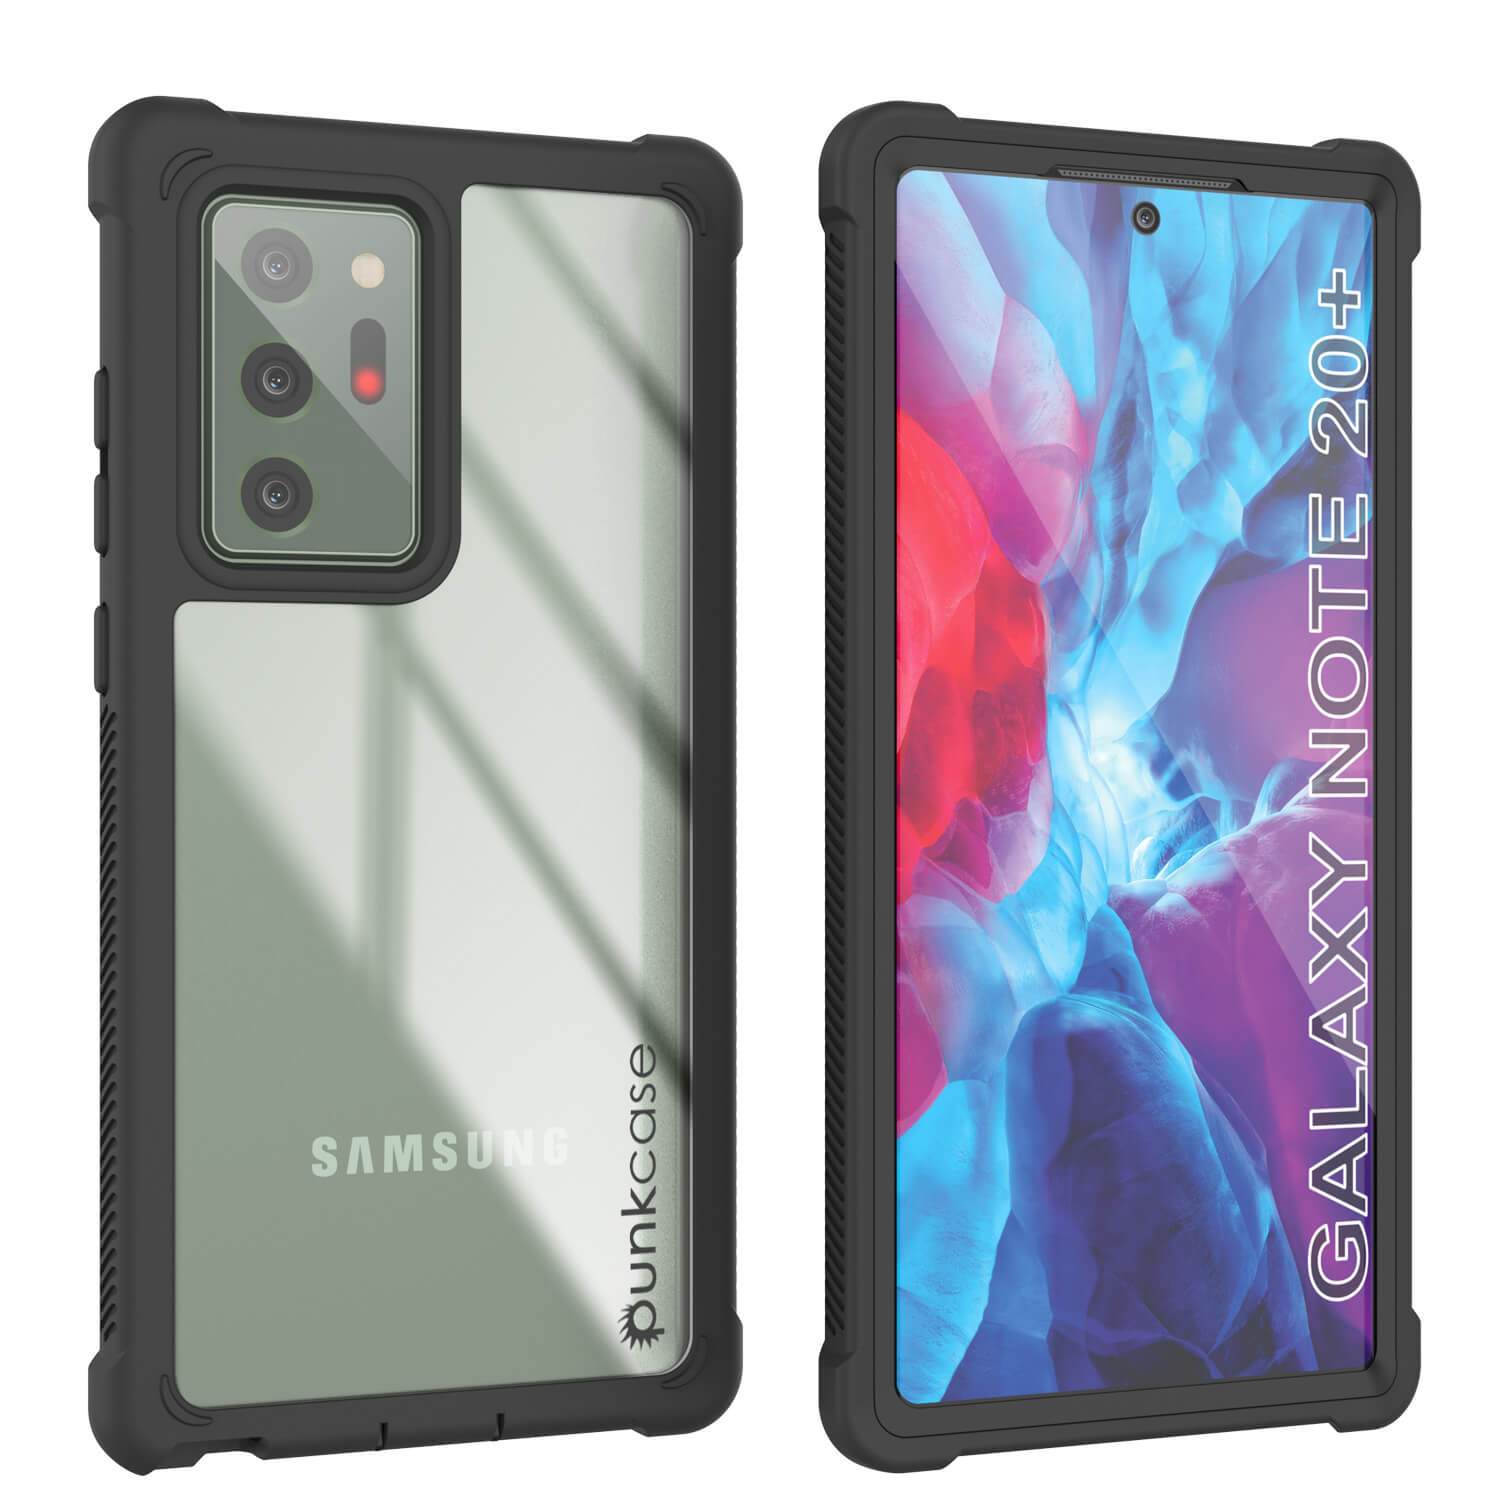 Punkcase Galaxy Note 20 Ultra Case, [Spartan Series] Clear Rugged Heavy Duty Cover W/Built in Screen Protector